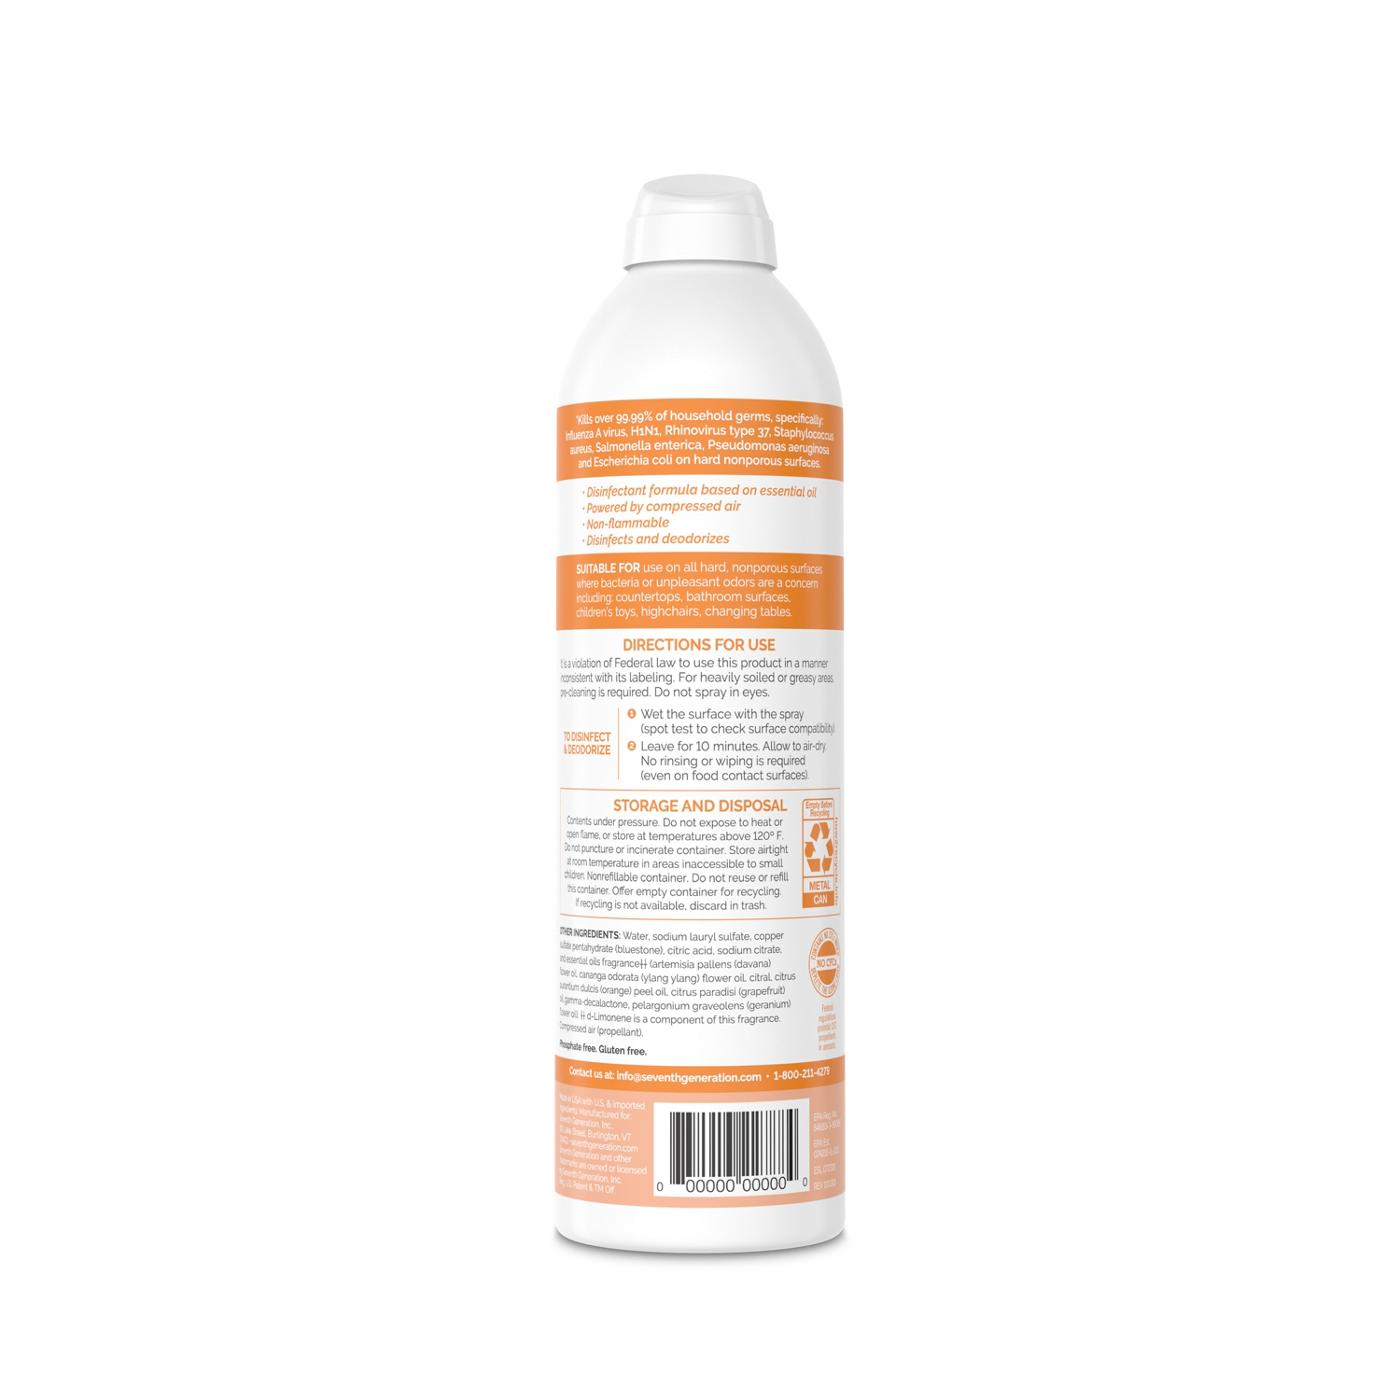 Seventh Generation Fresh Citrus and Thyme Disinfectant Spray; image 4 of 10